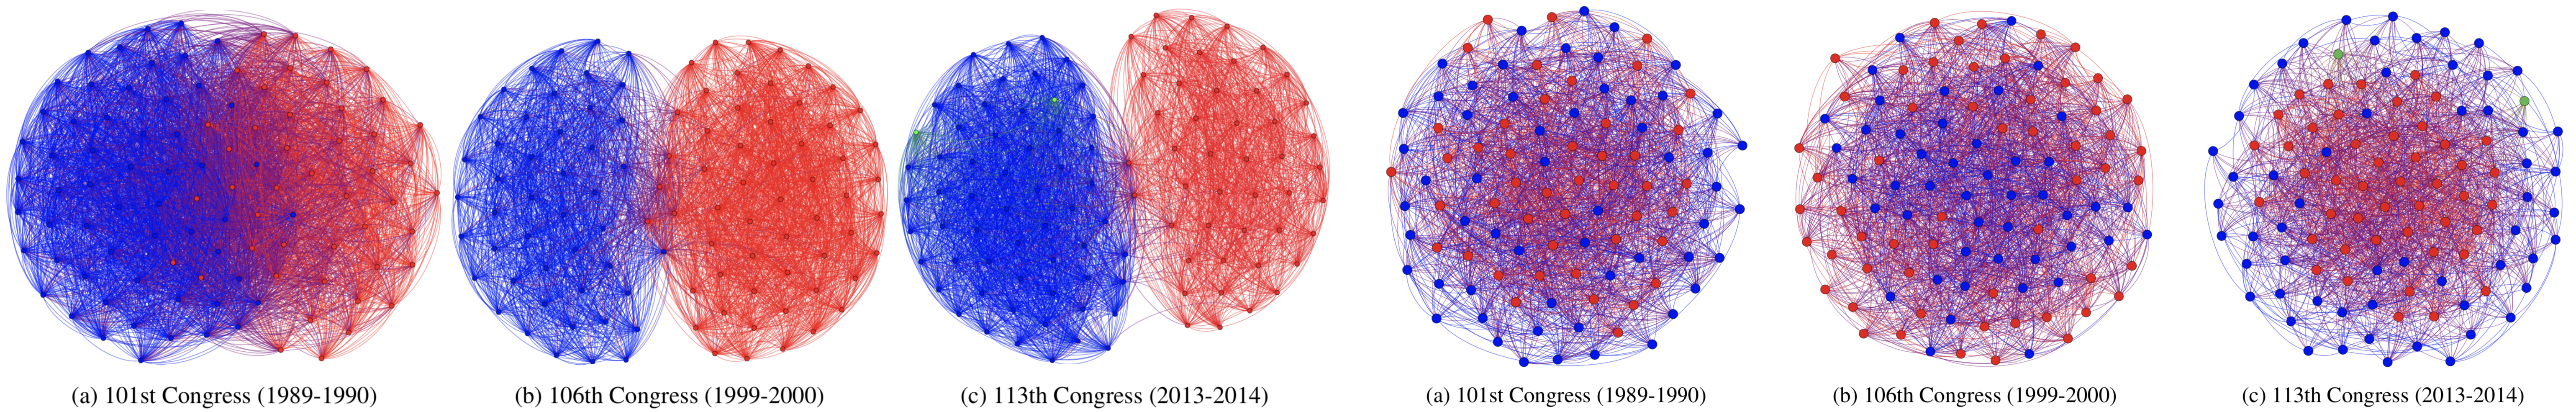 Recovering Social Networks by Observing Votes